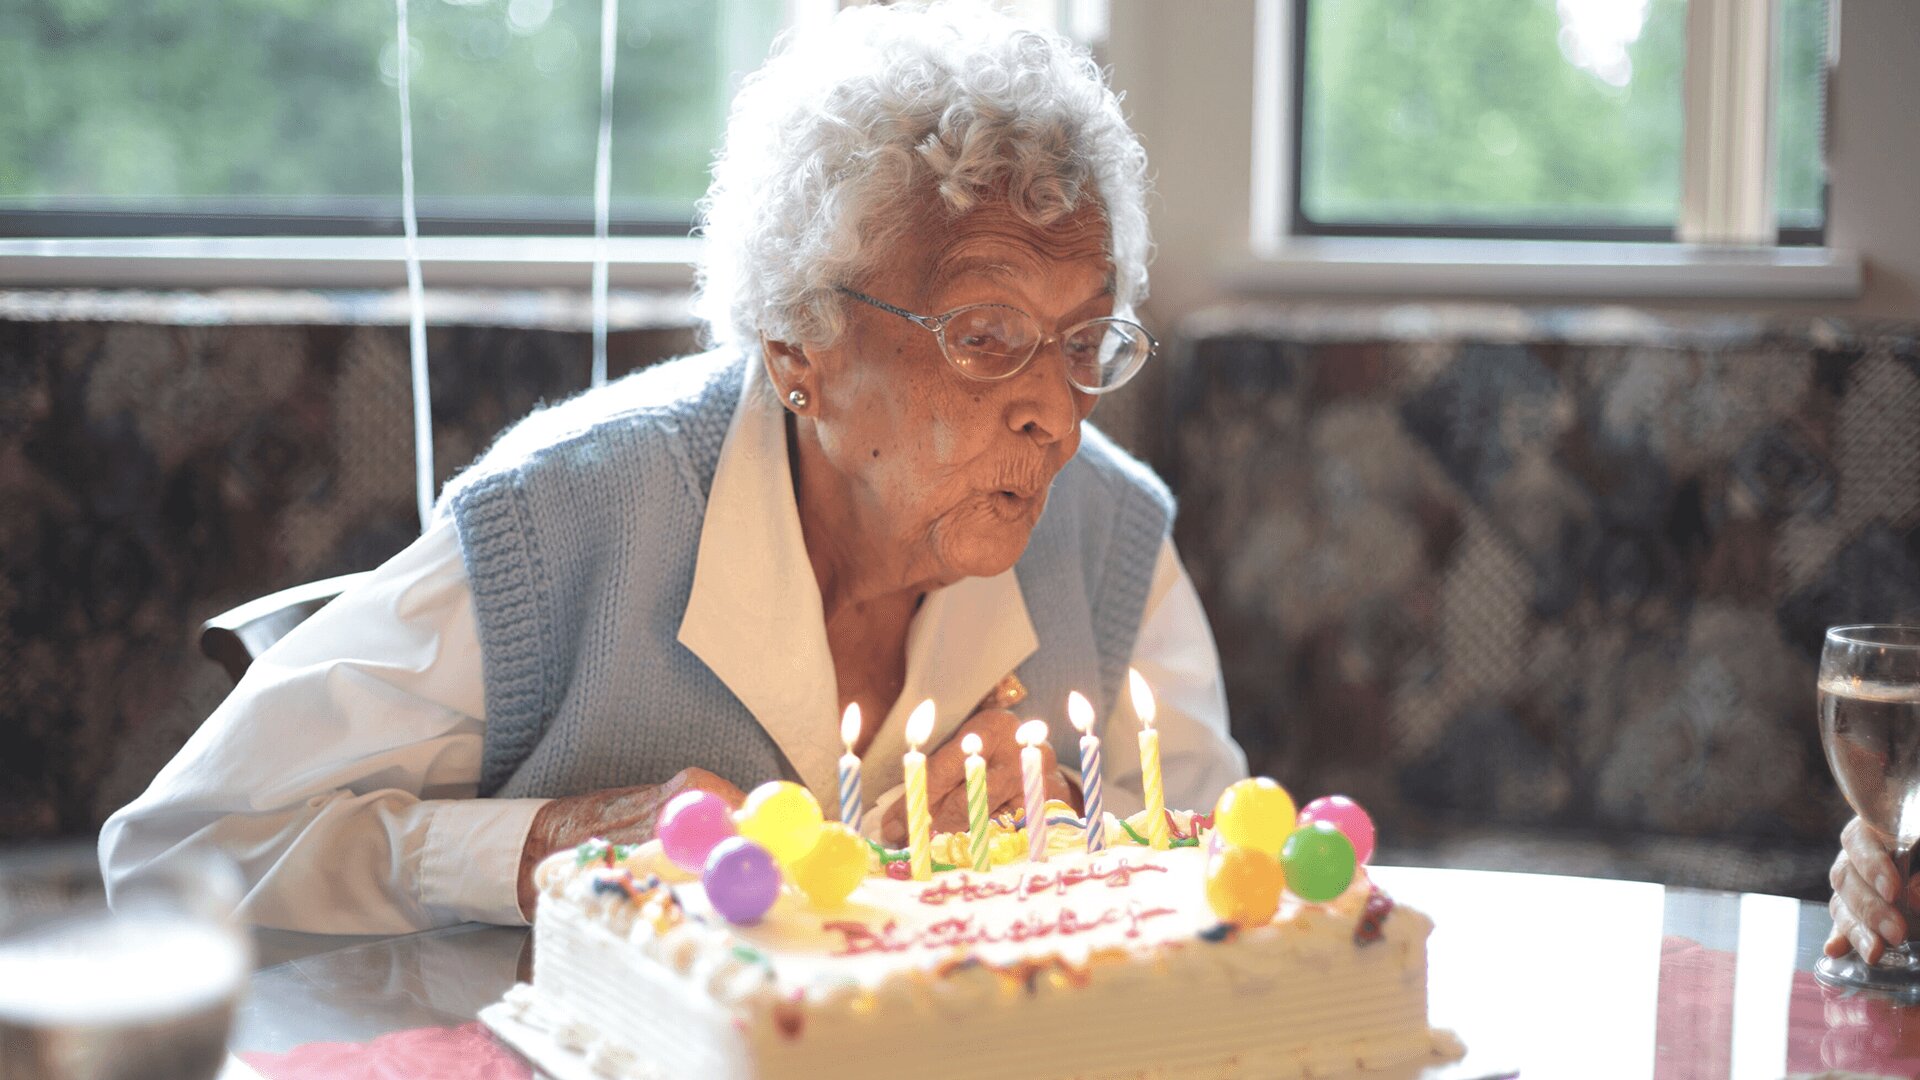 An elderly lady blowing candles on her birthday